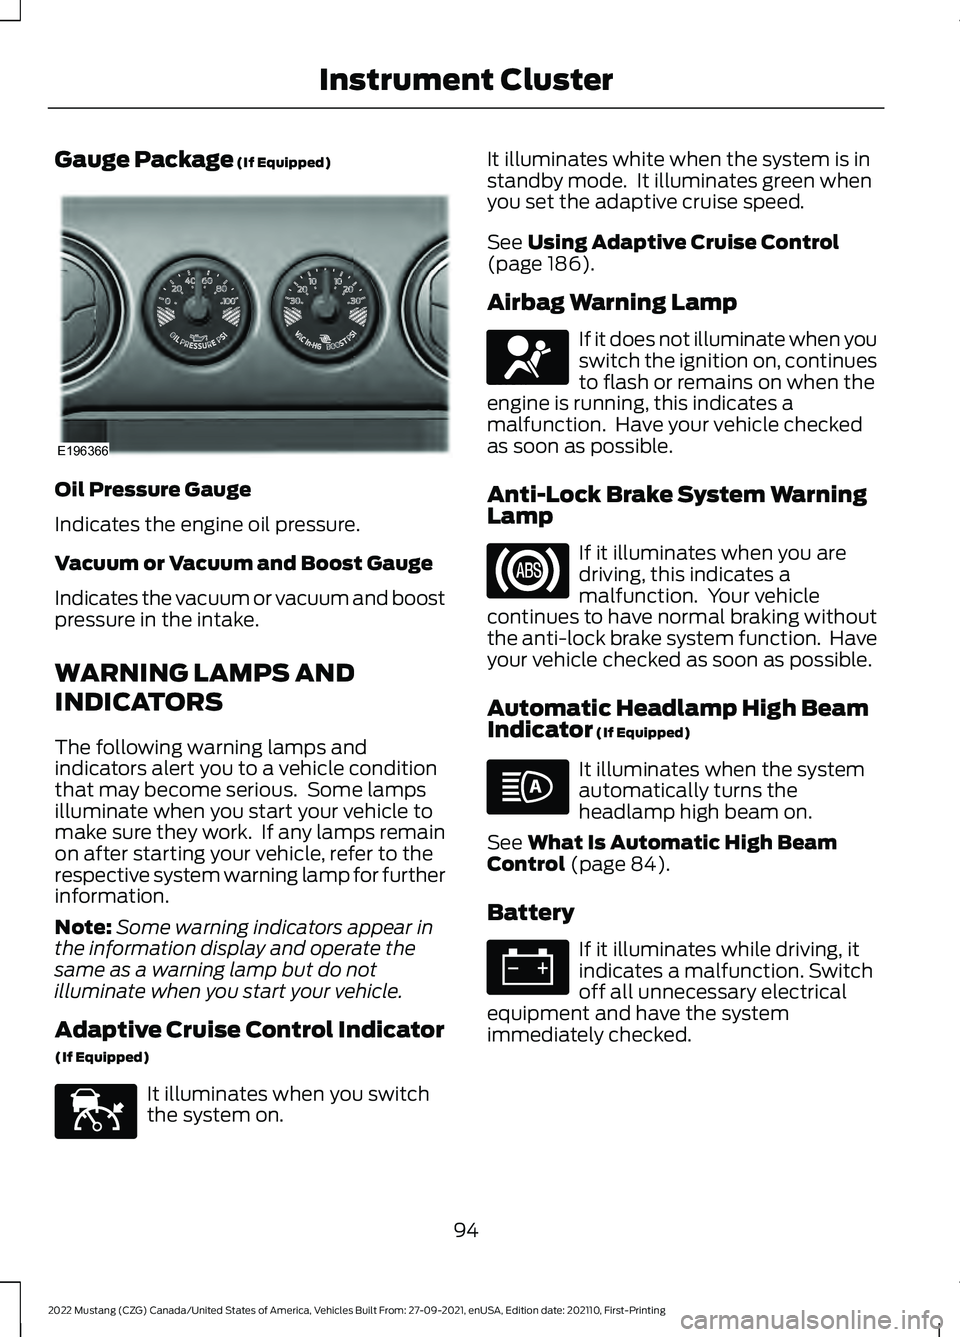 FORD MUSTANG 2022  Owners Manual Gauge Package (If Equipped)
Oil Pressure Gauge
Indicates the engine oil pressure.
Vacuum or Vacuum and Boost Gauge
Indicates the vacuum or vacuum and boost
pressure in the intake.
WARNING LAMPS AND
IN